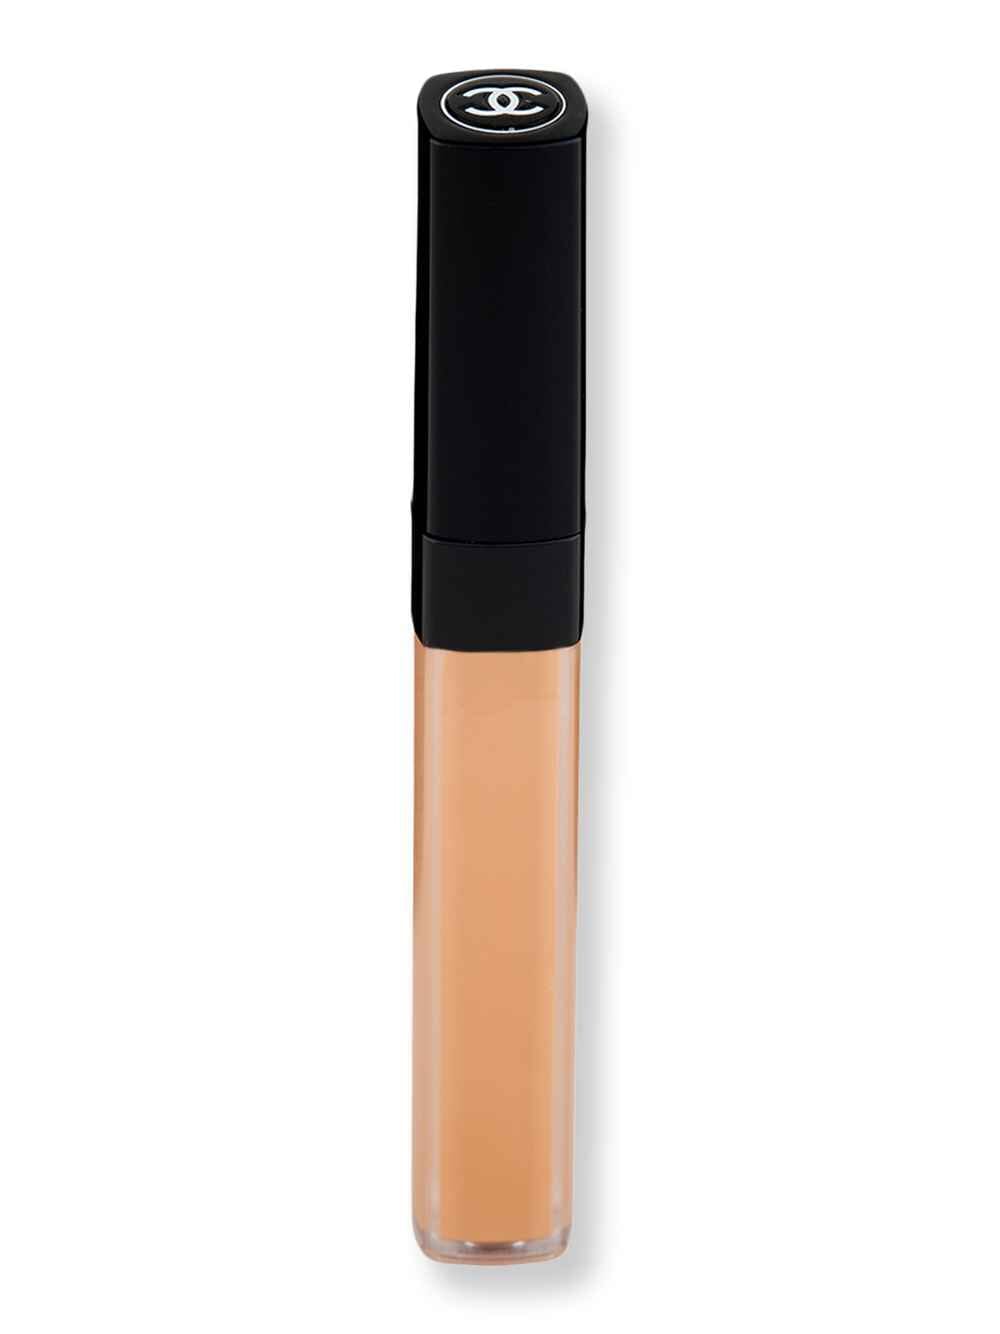 Chanel Chanel Corrector Perfection 6 g42 Beige Golden Face Concealers 